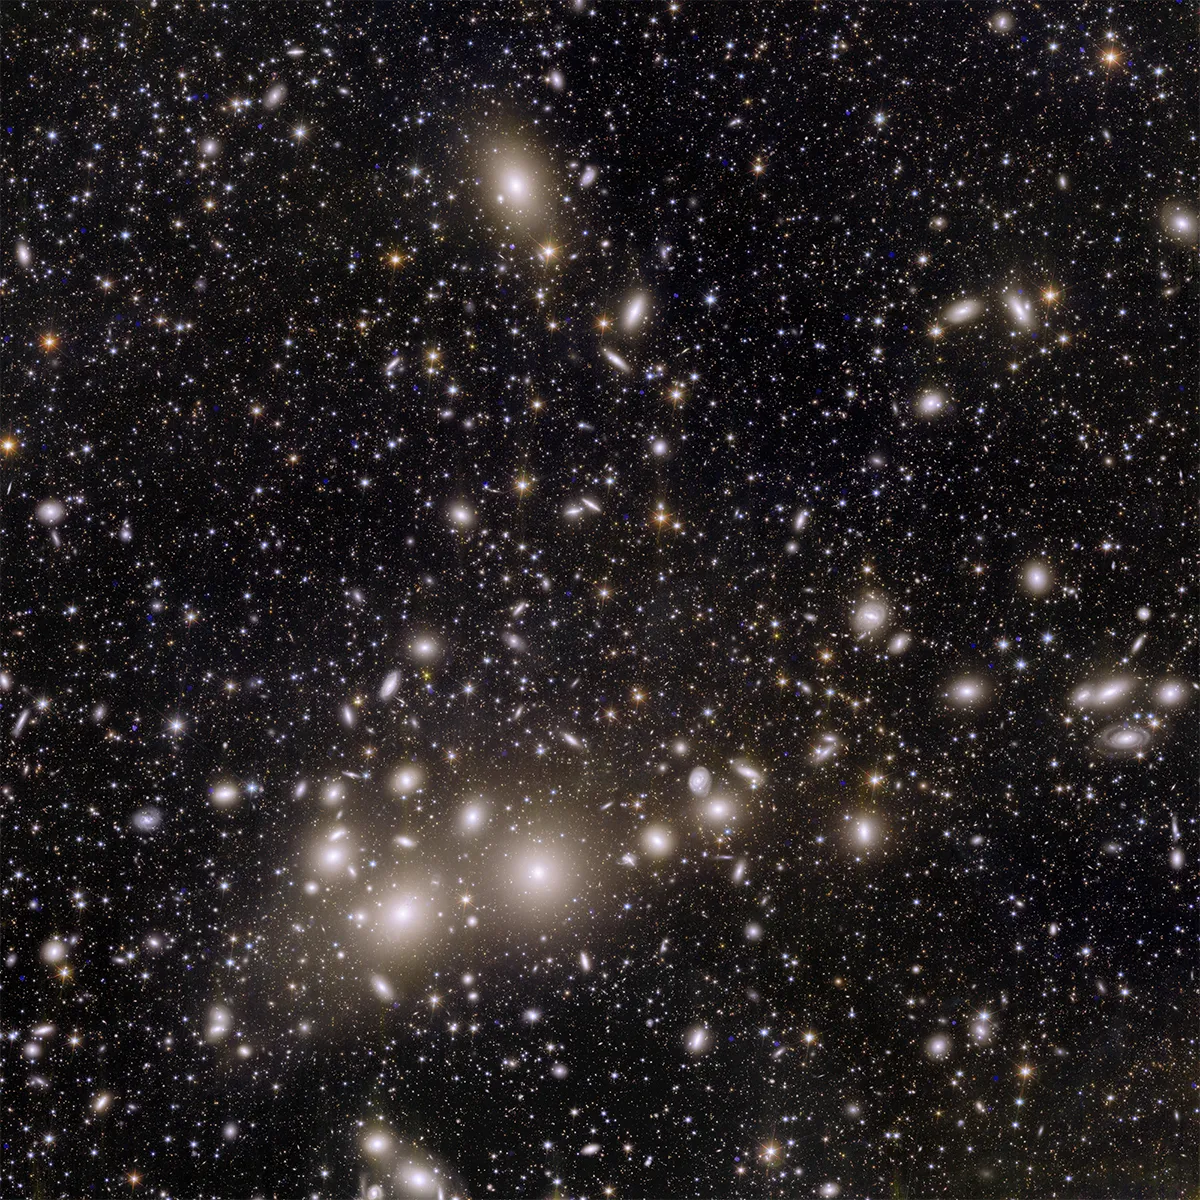 The Perseus cluster of galaxies, captured by the European Space Agency's Euclid mission. Released 7 November 2023. Credit: ESA/Euclid/Euclid Consortium/NASA, image processing by J.-C. Cuillandre (CEA Paris-Saclay), G. Anselmi; CC BY-SA 3.0 IGO